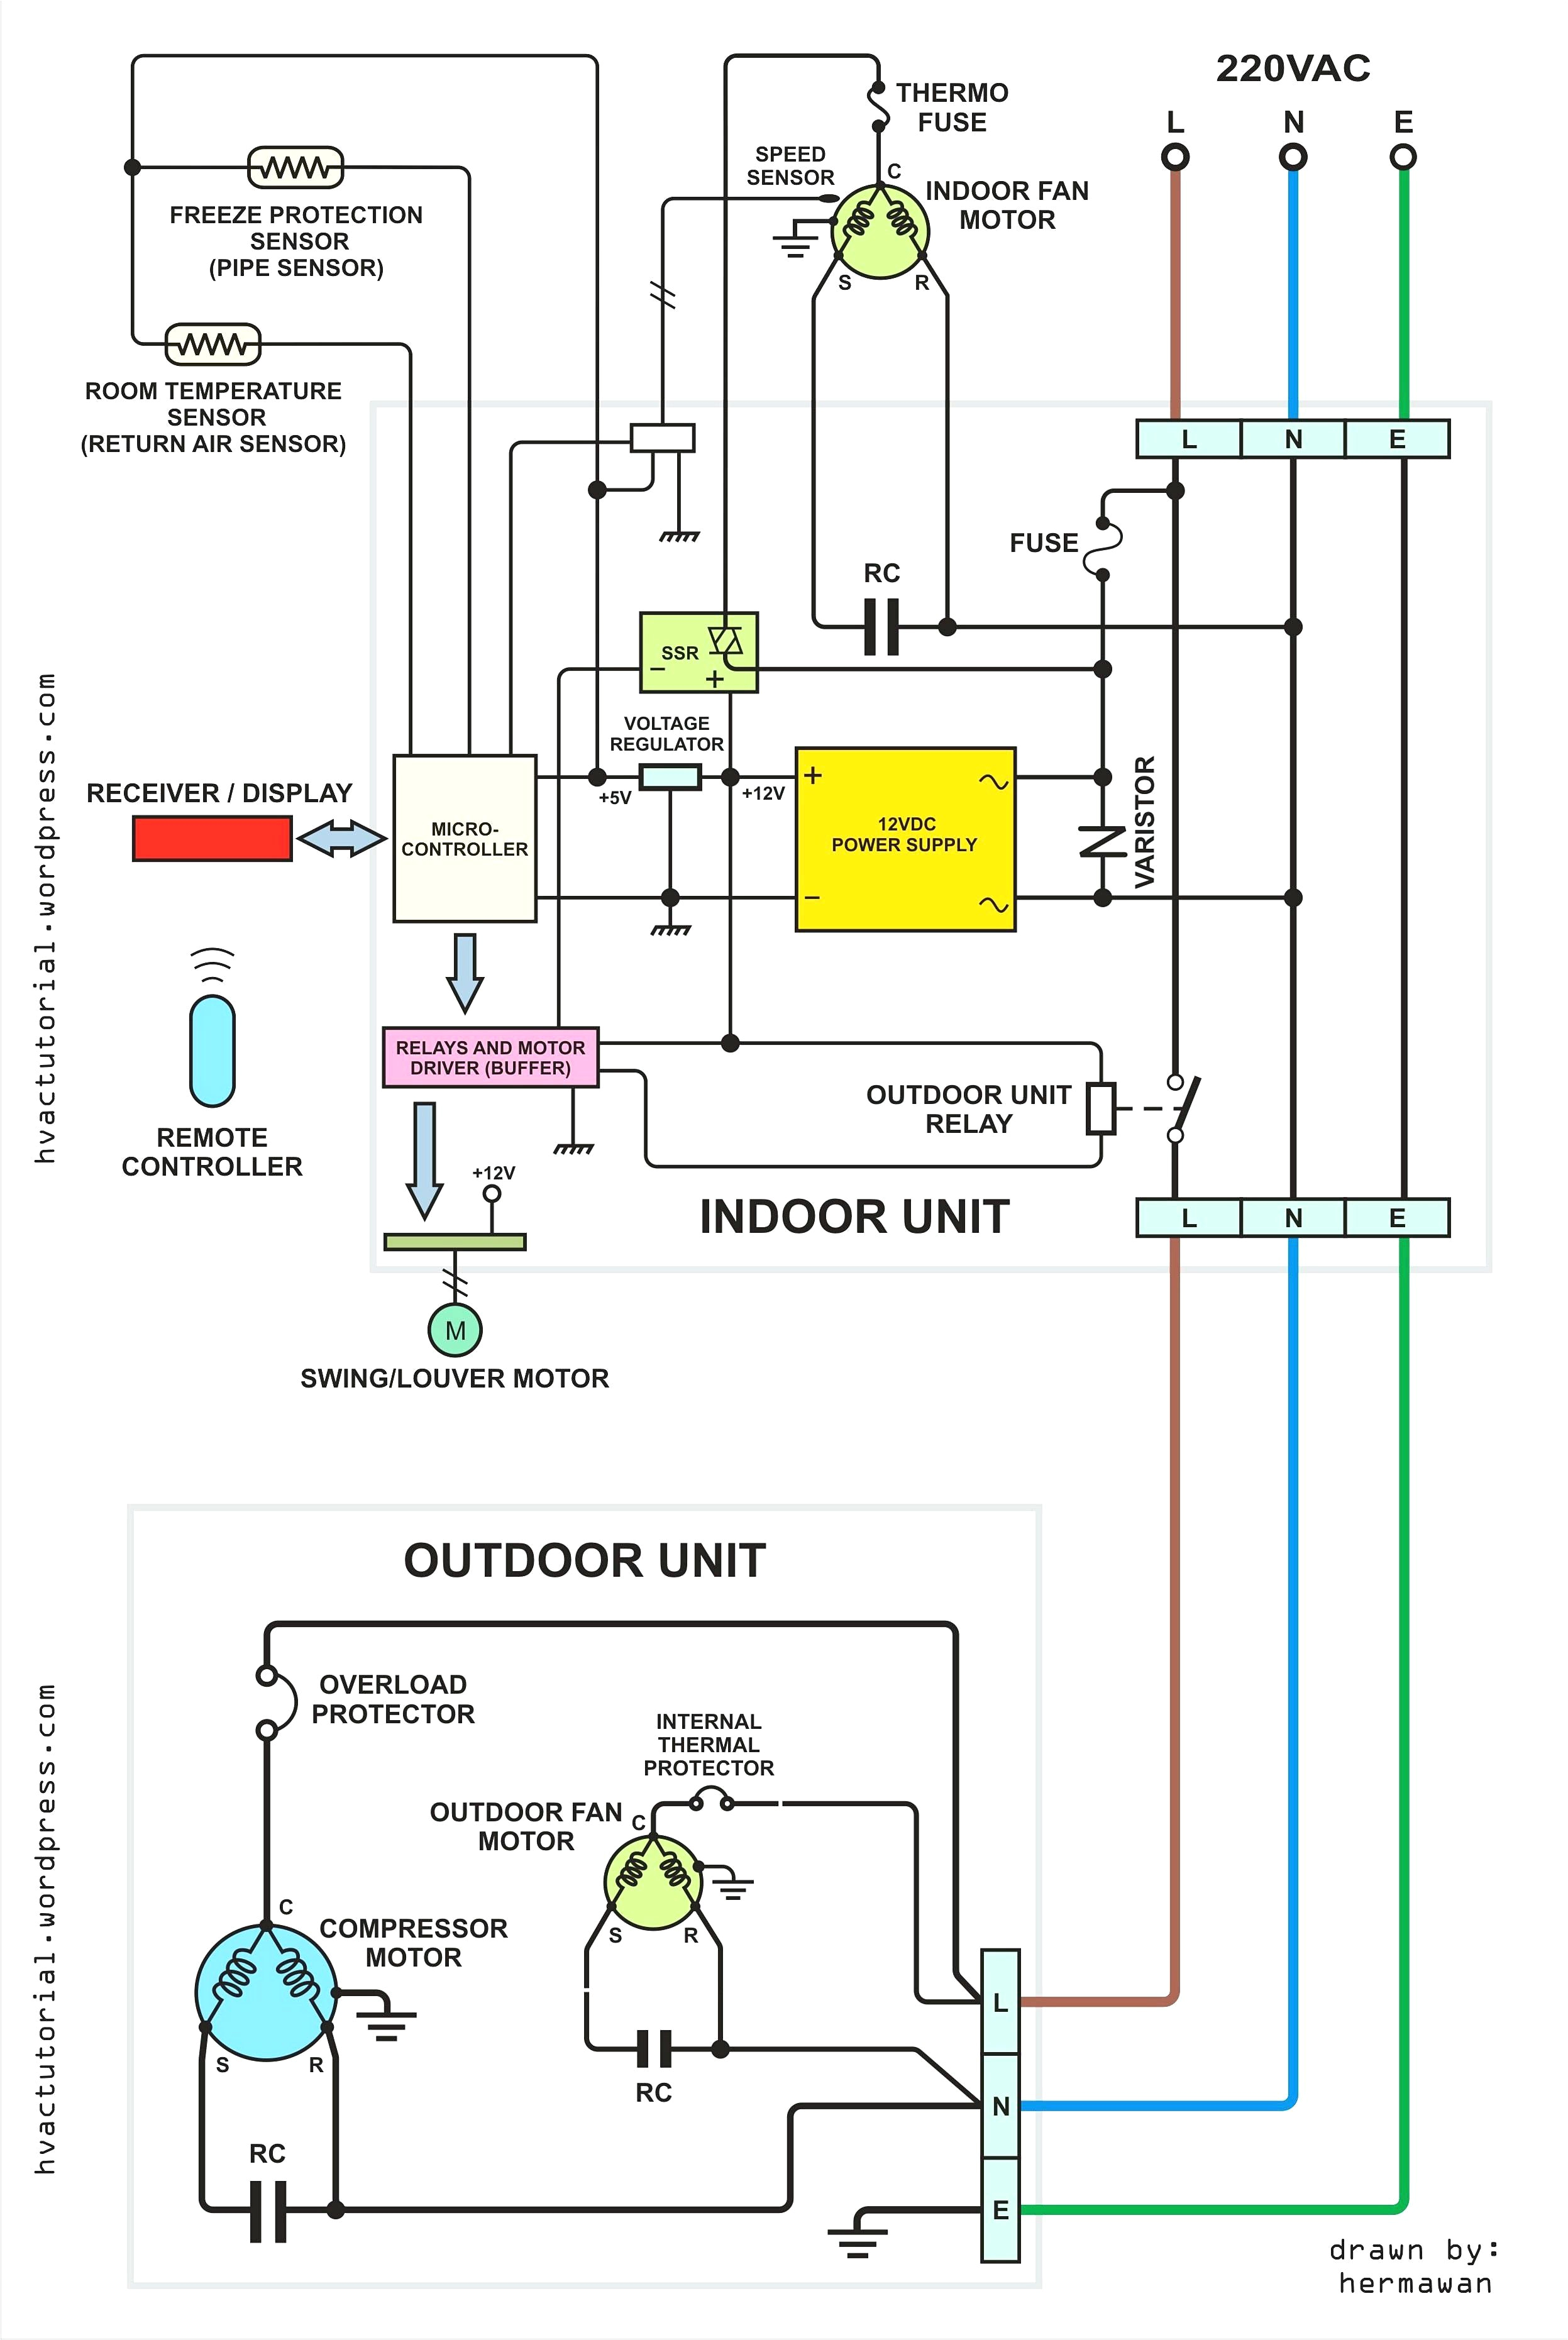 air conditioner thermostat wiring diagram awesome stunning lennox at air conditioner thermostat wiring diagram awesome stunning